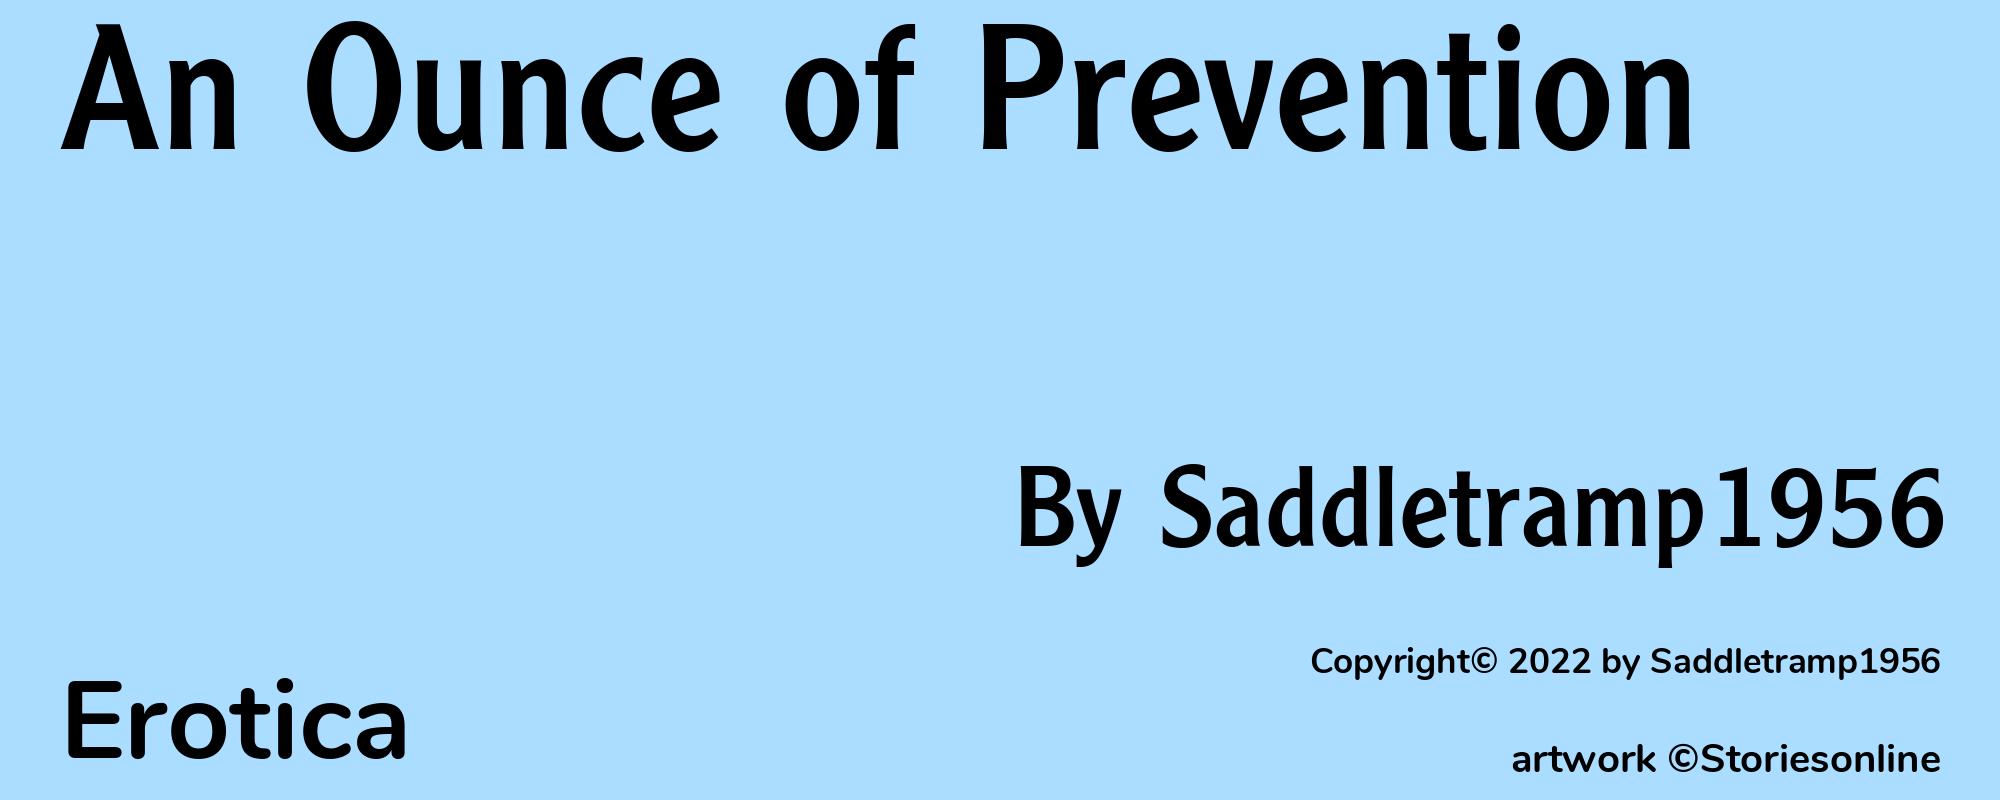 An Ounce of Prevention - Cover